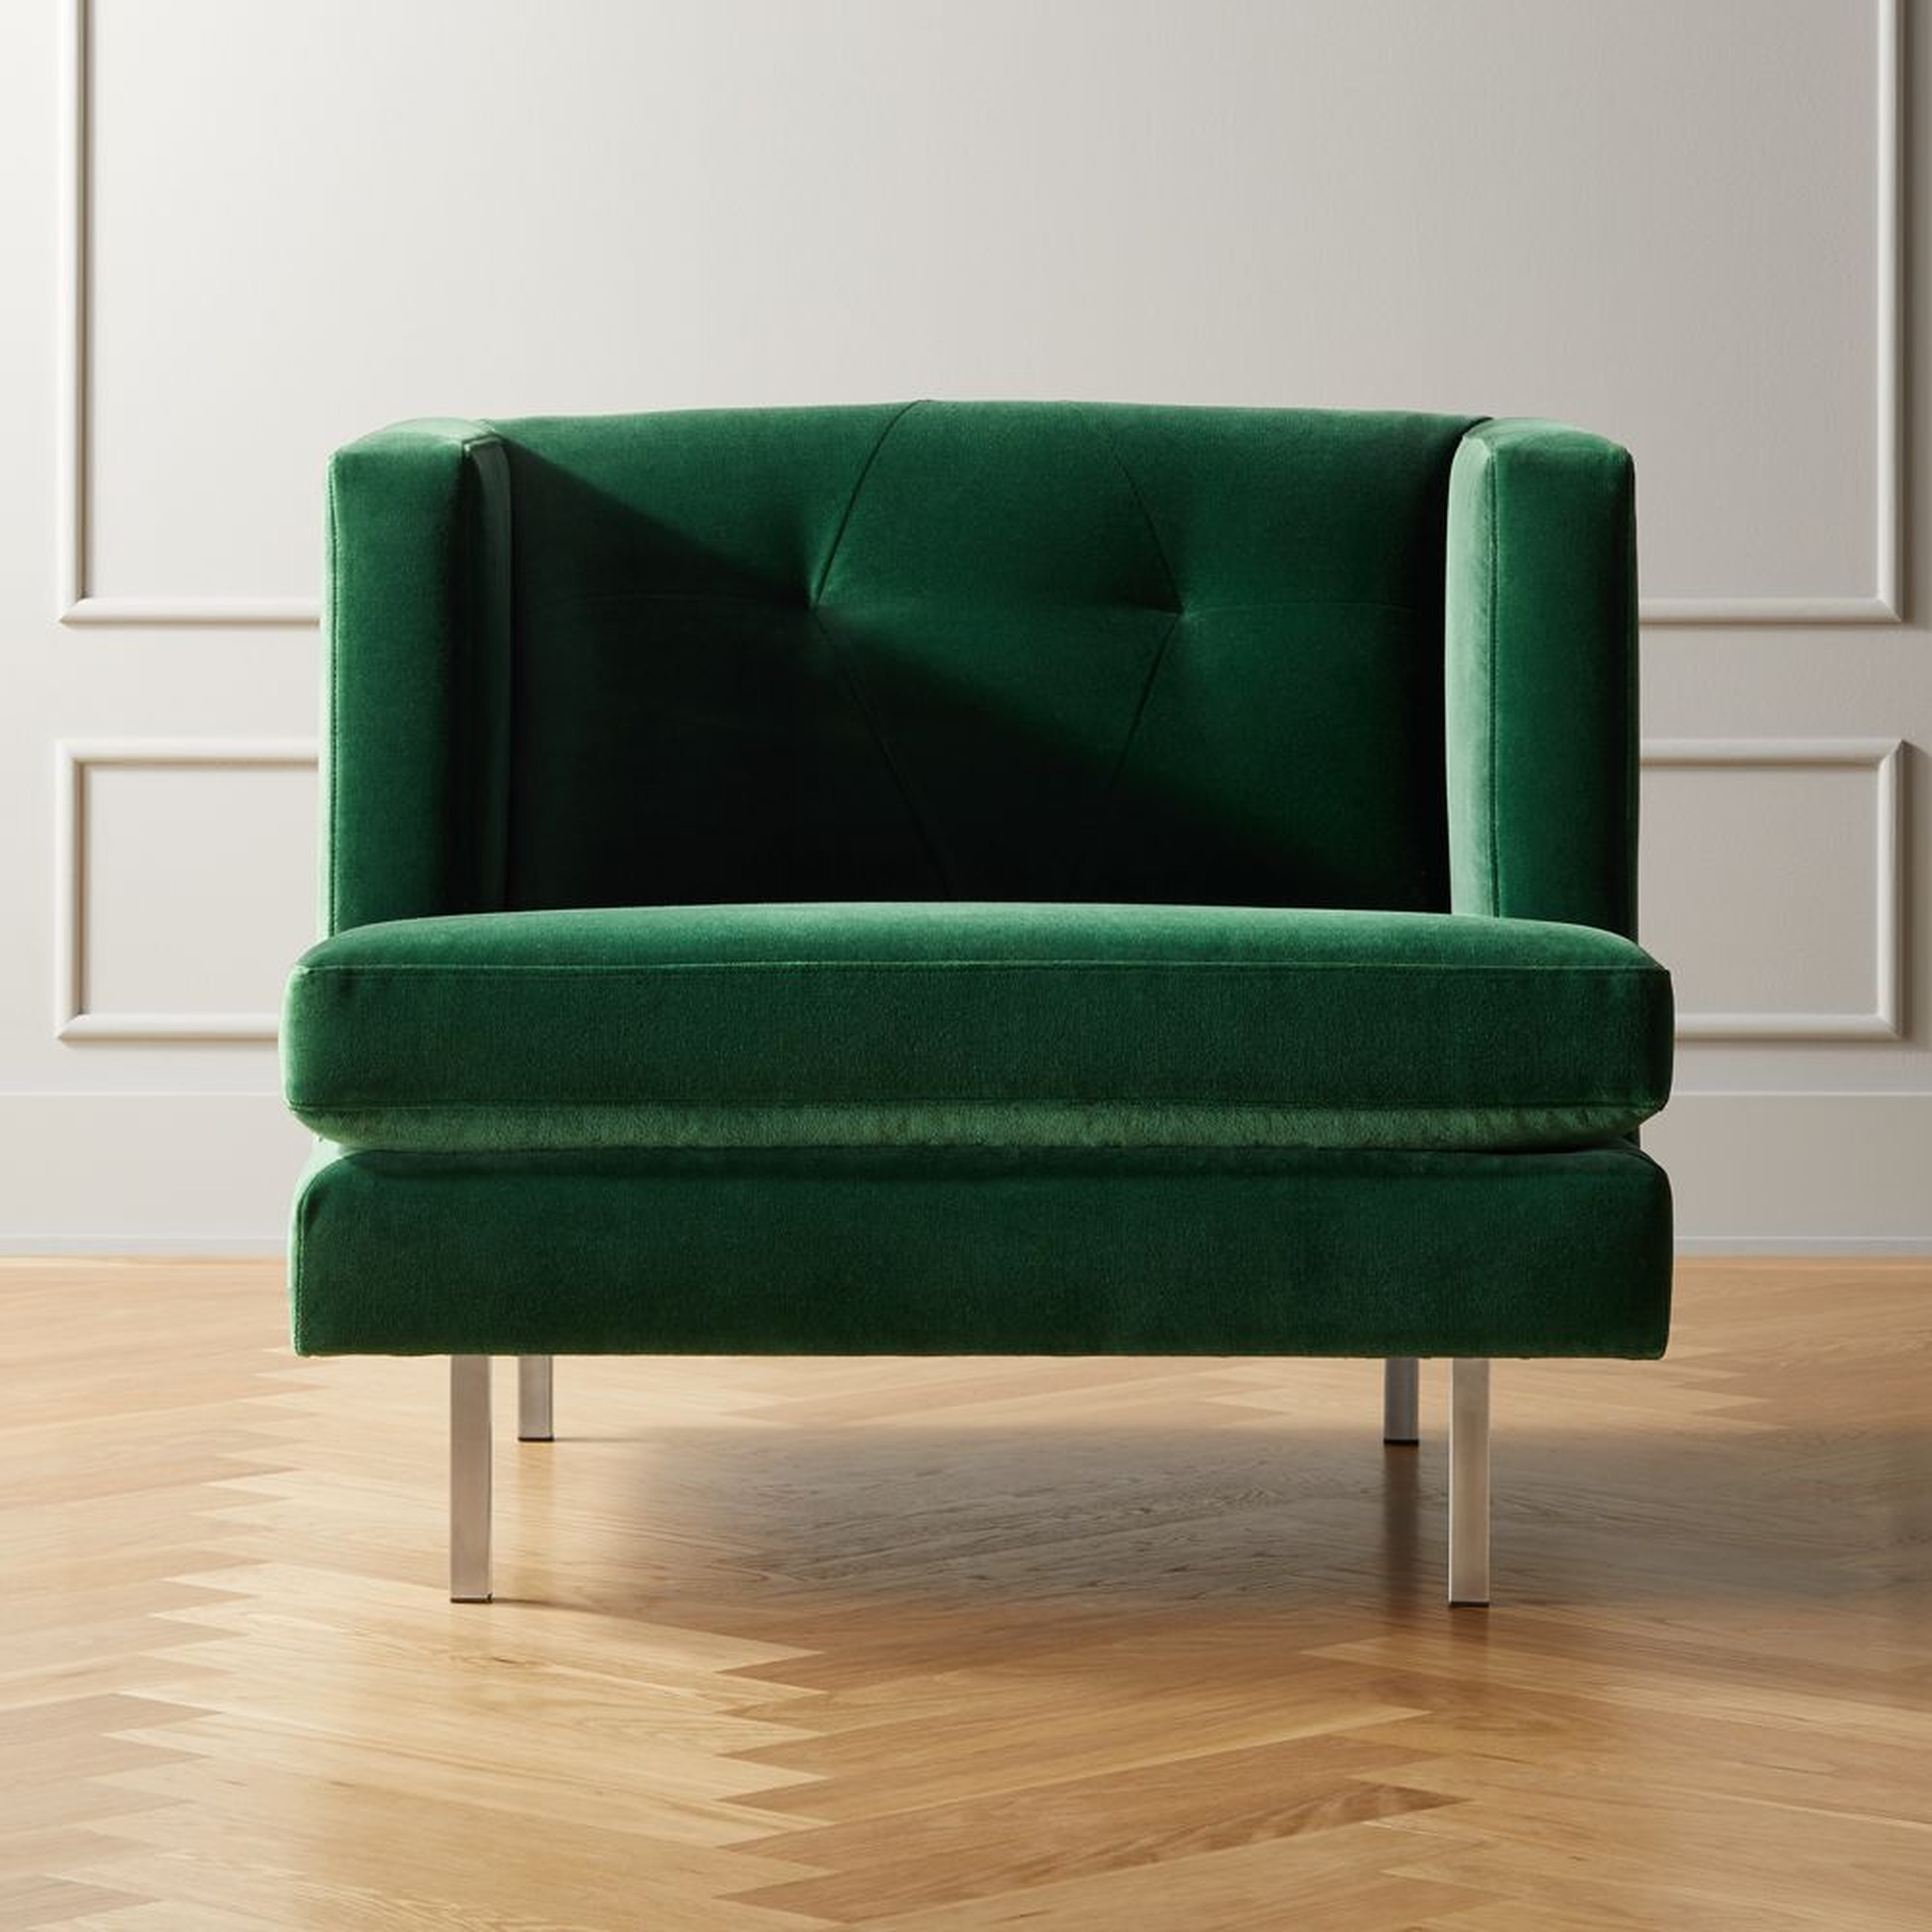 Avec Emerald Green Chair with Brushed Stainless Steel Legs - CB2